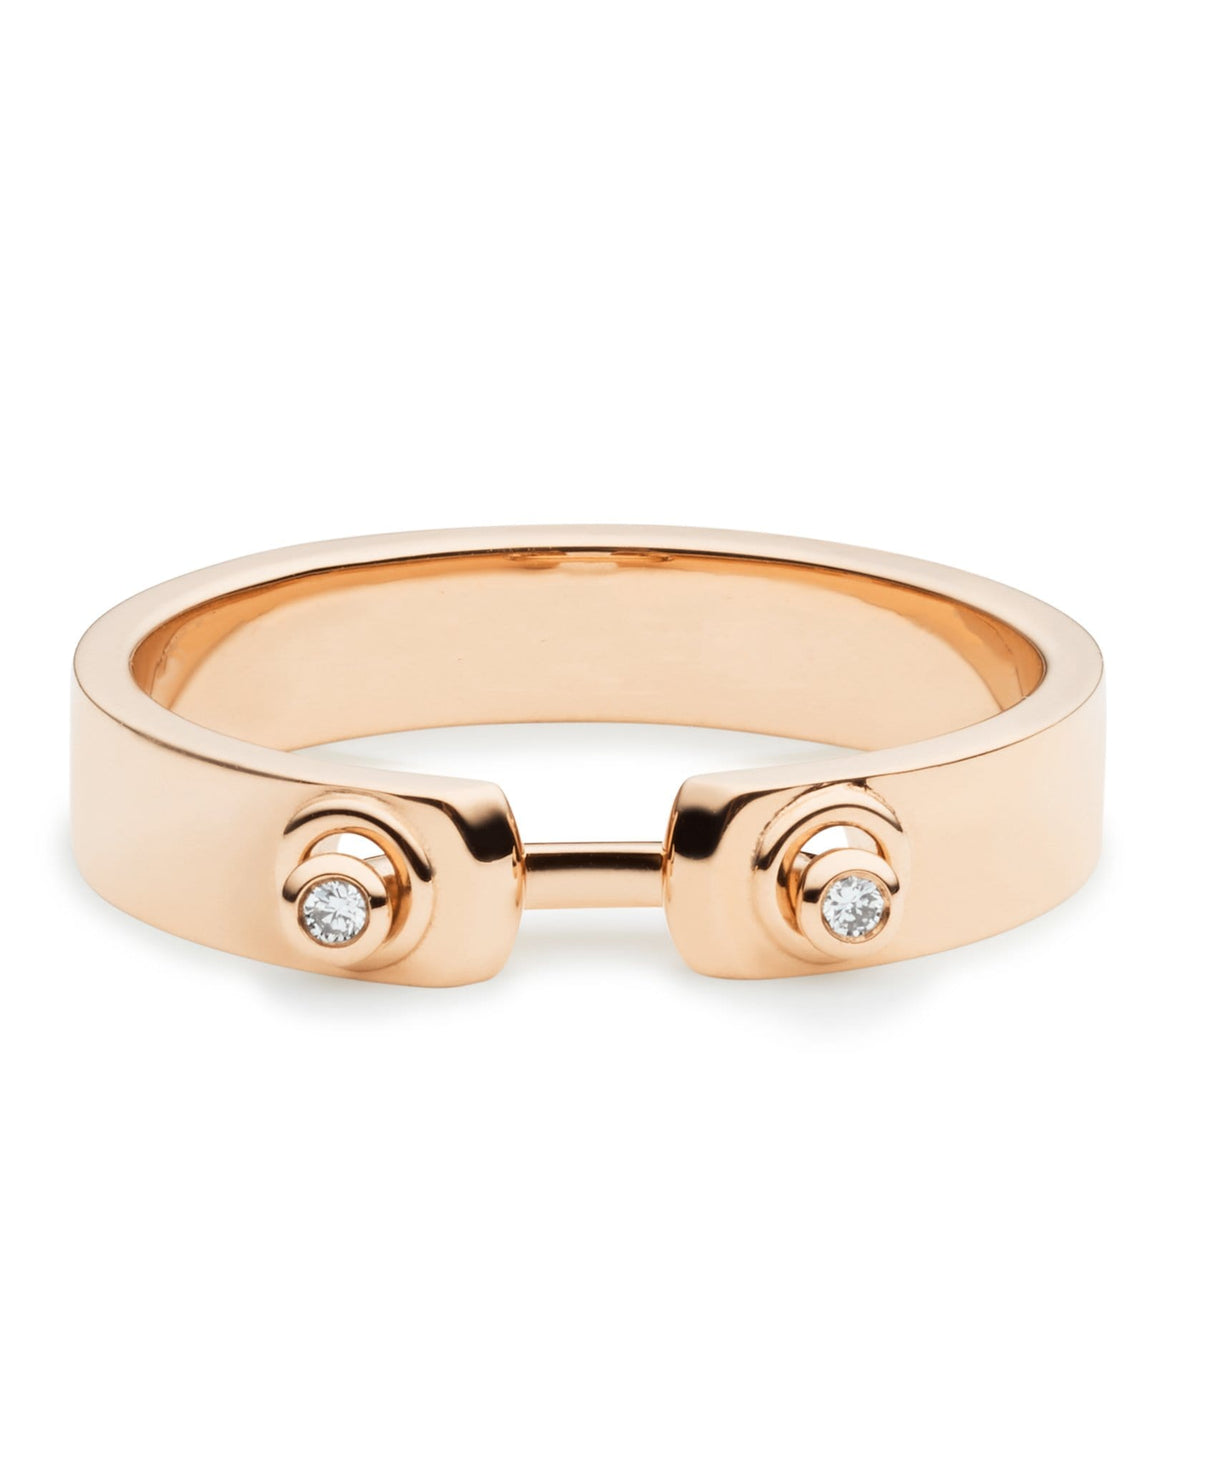 Monday Morning Mood Ring: Discover Luxury Fine Jewelry | Nouvel Heritage